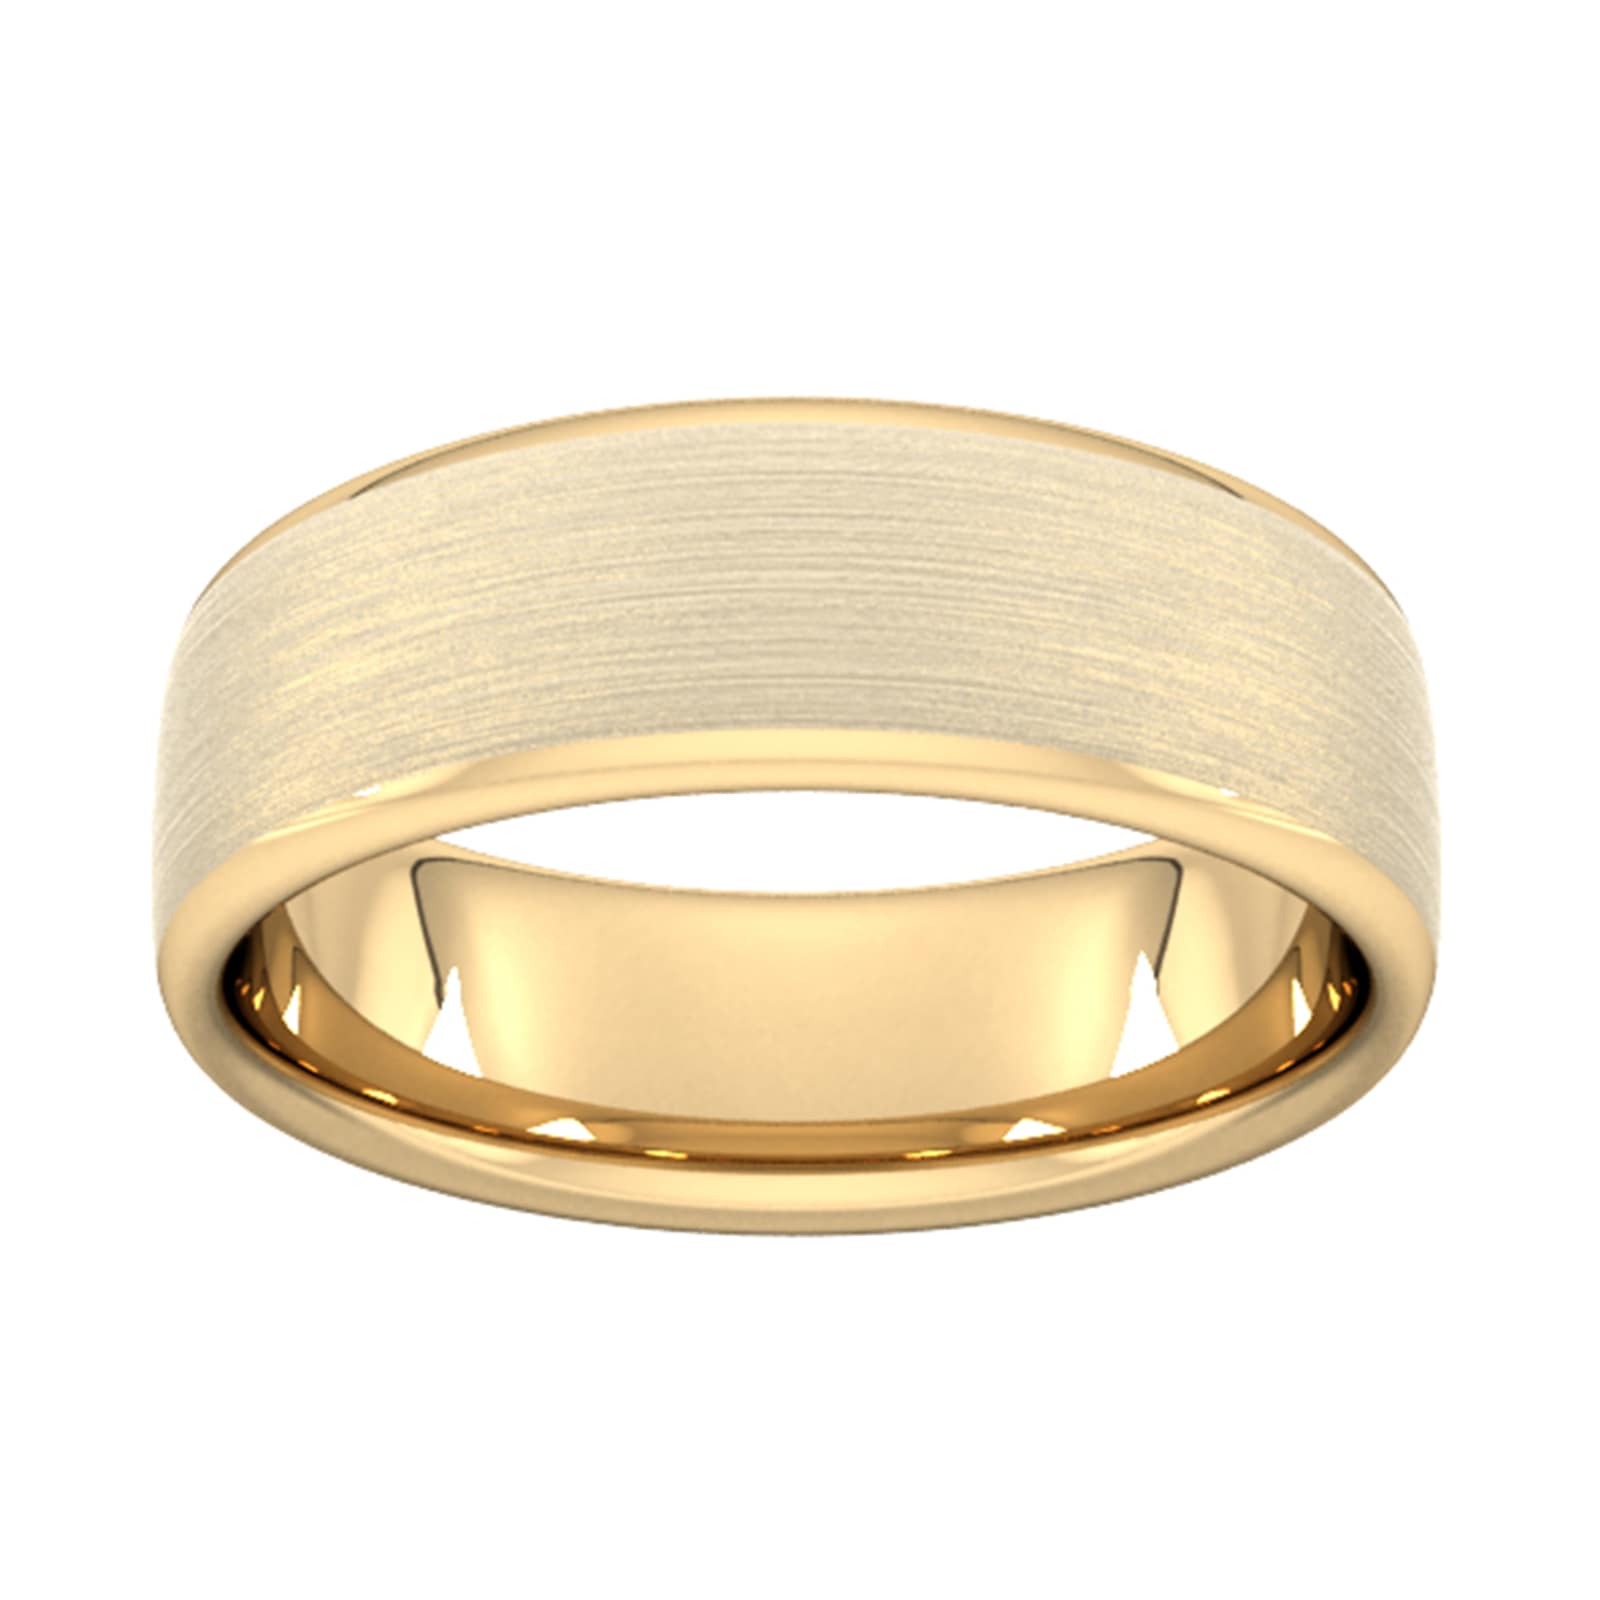 7mm Slight Court Extra Heavy Matt Finished Wedding Ring In 9 Carat Yellow Gold - Ring Size W